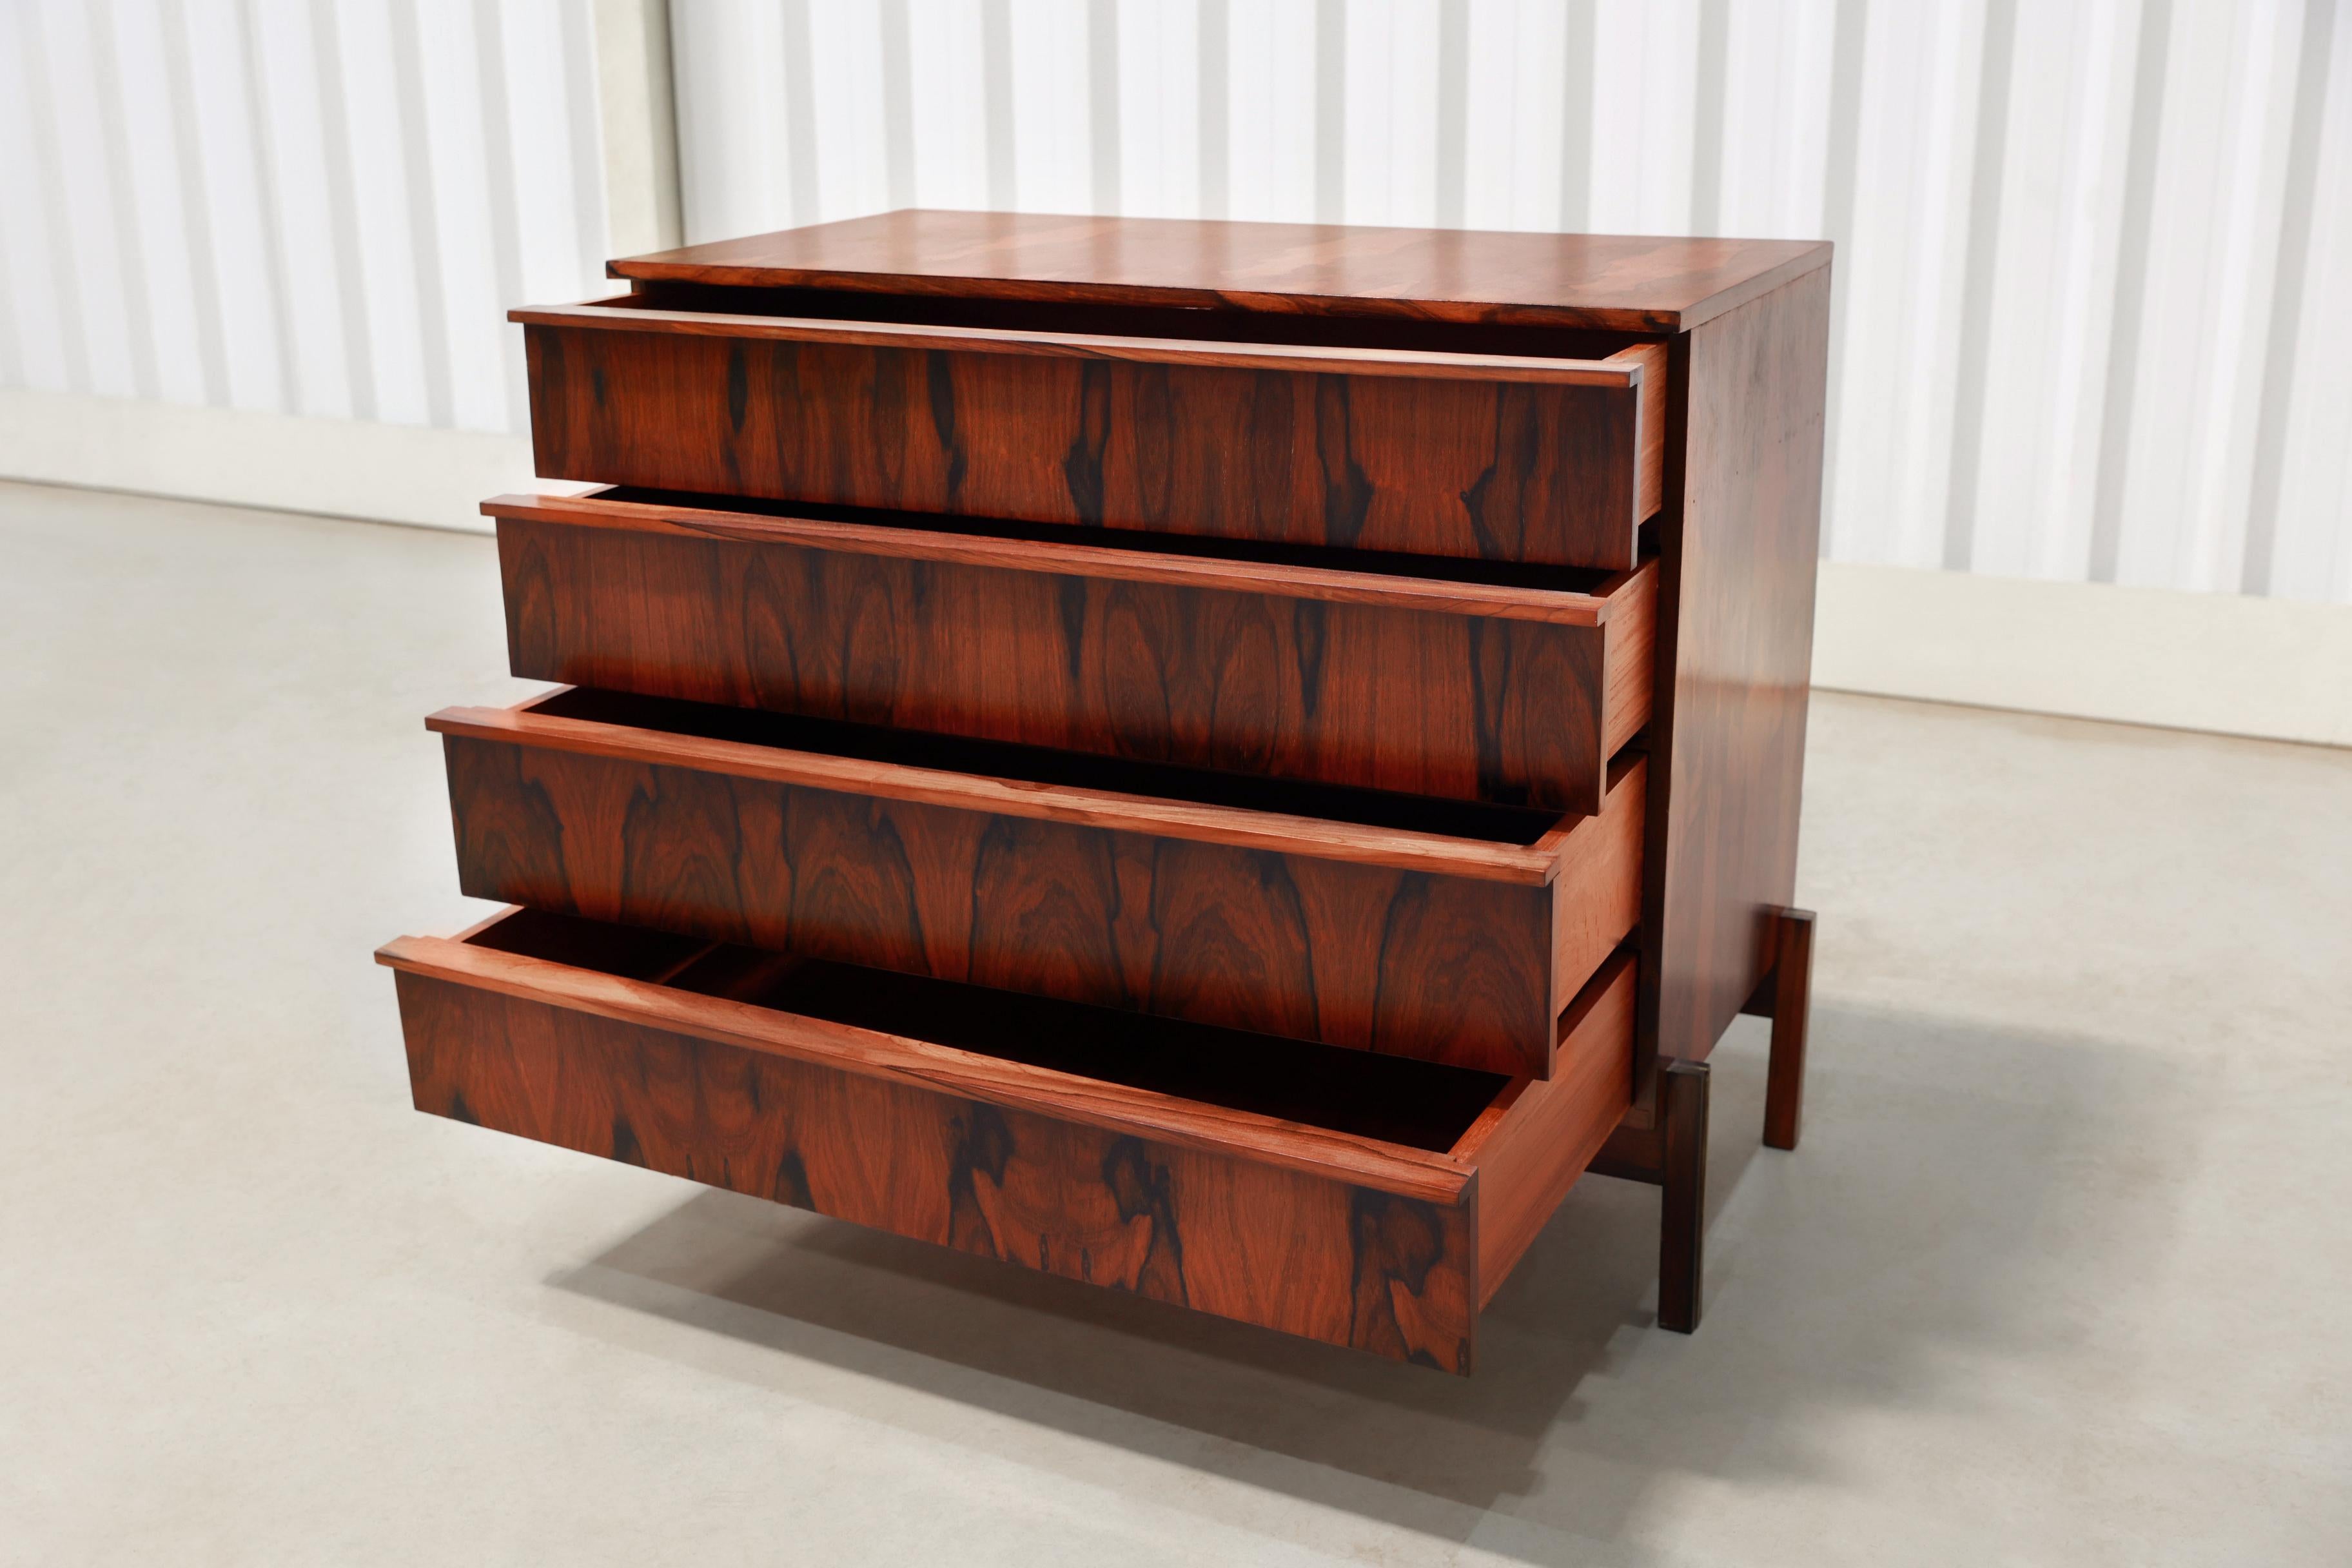 Beautiful chest of drawers in Brazilian Rosewood (known as Jacaranda) and Rosewood veneer. It consists of 4 drawers resting in four delicate legs. What makes this piece are the wood patterns displaying colorful veins. This gorgeous piece is